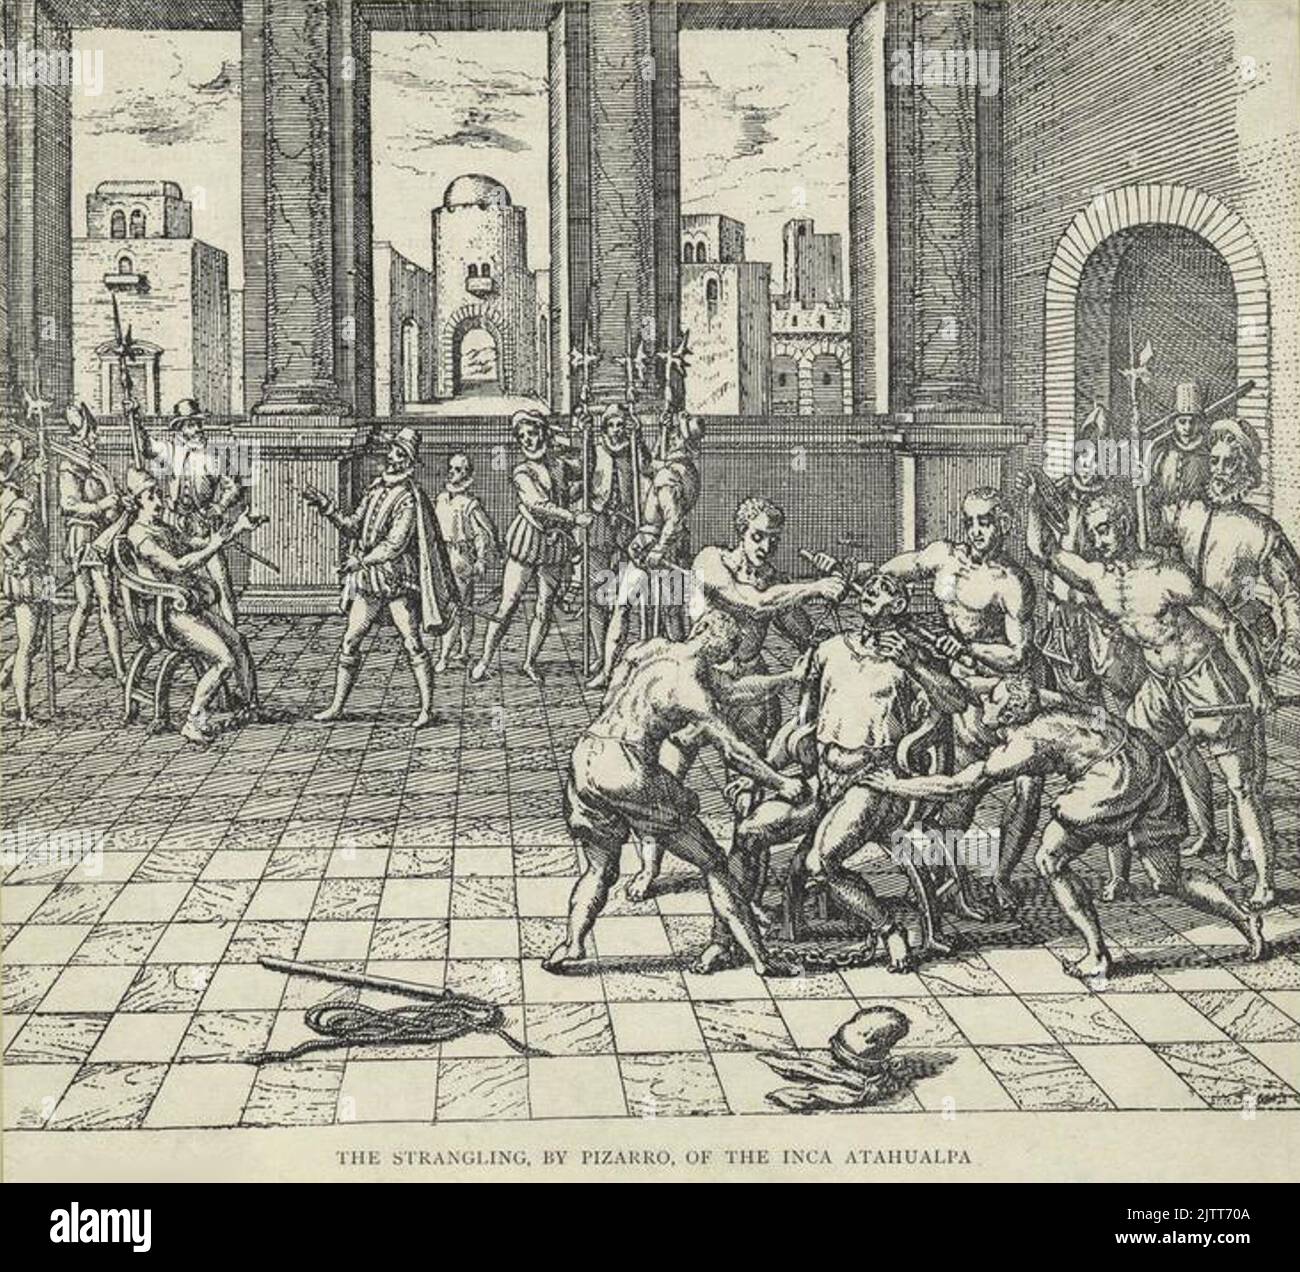 The execution by strangulation with a garrote of the last Inca king Atahualpa by Spanish conquistador Francisco Pizarro in 1533, engraving by Theodor de Bry Stock Photo